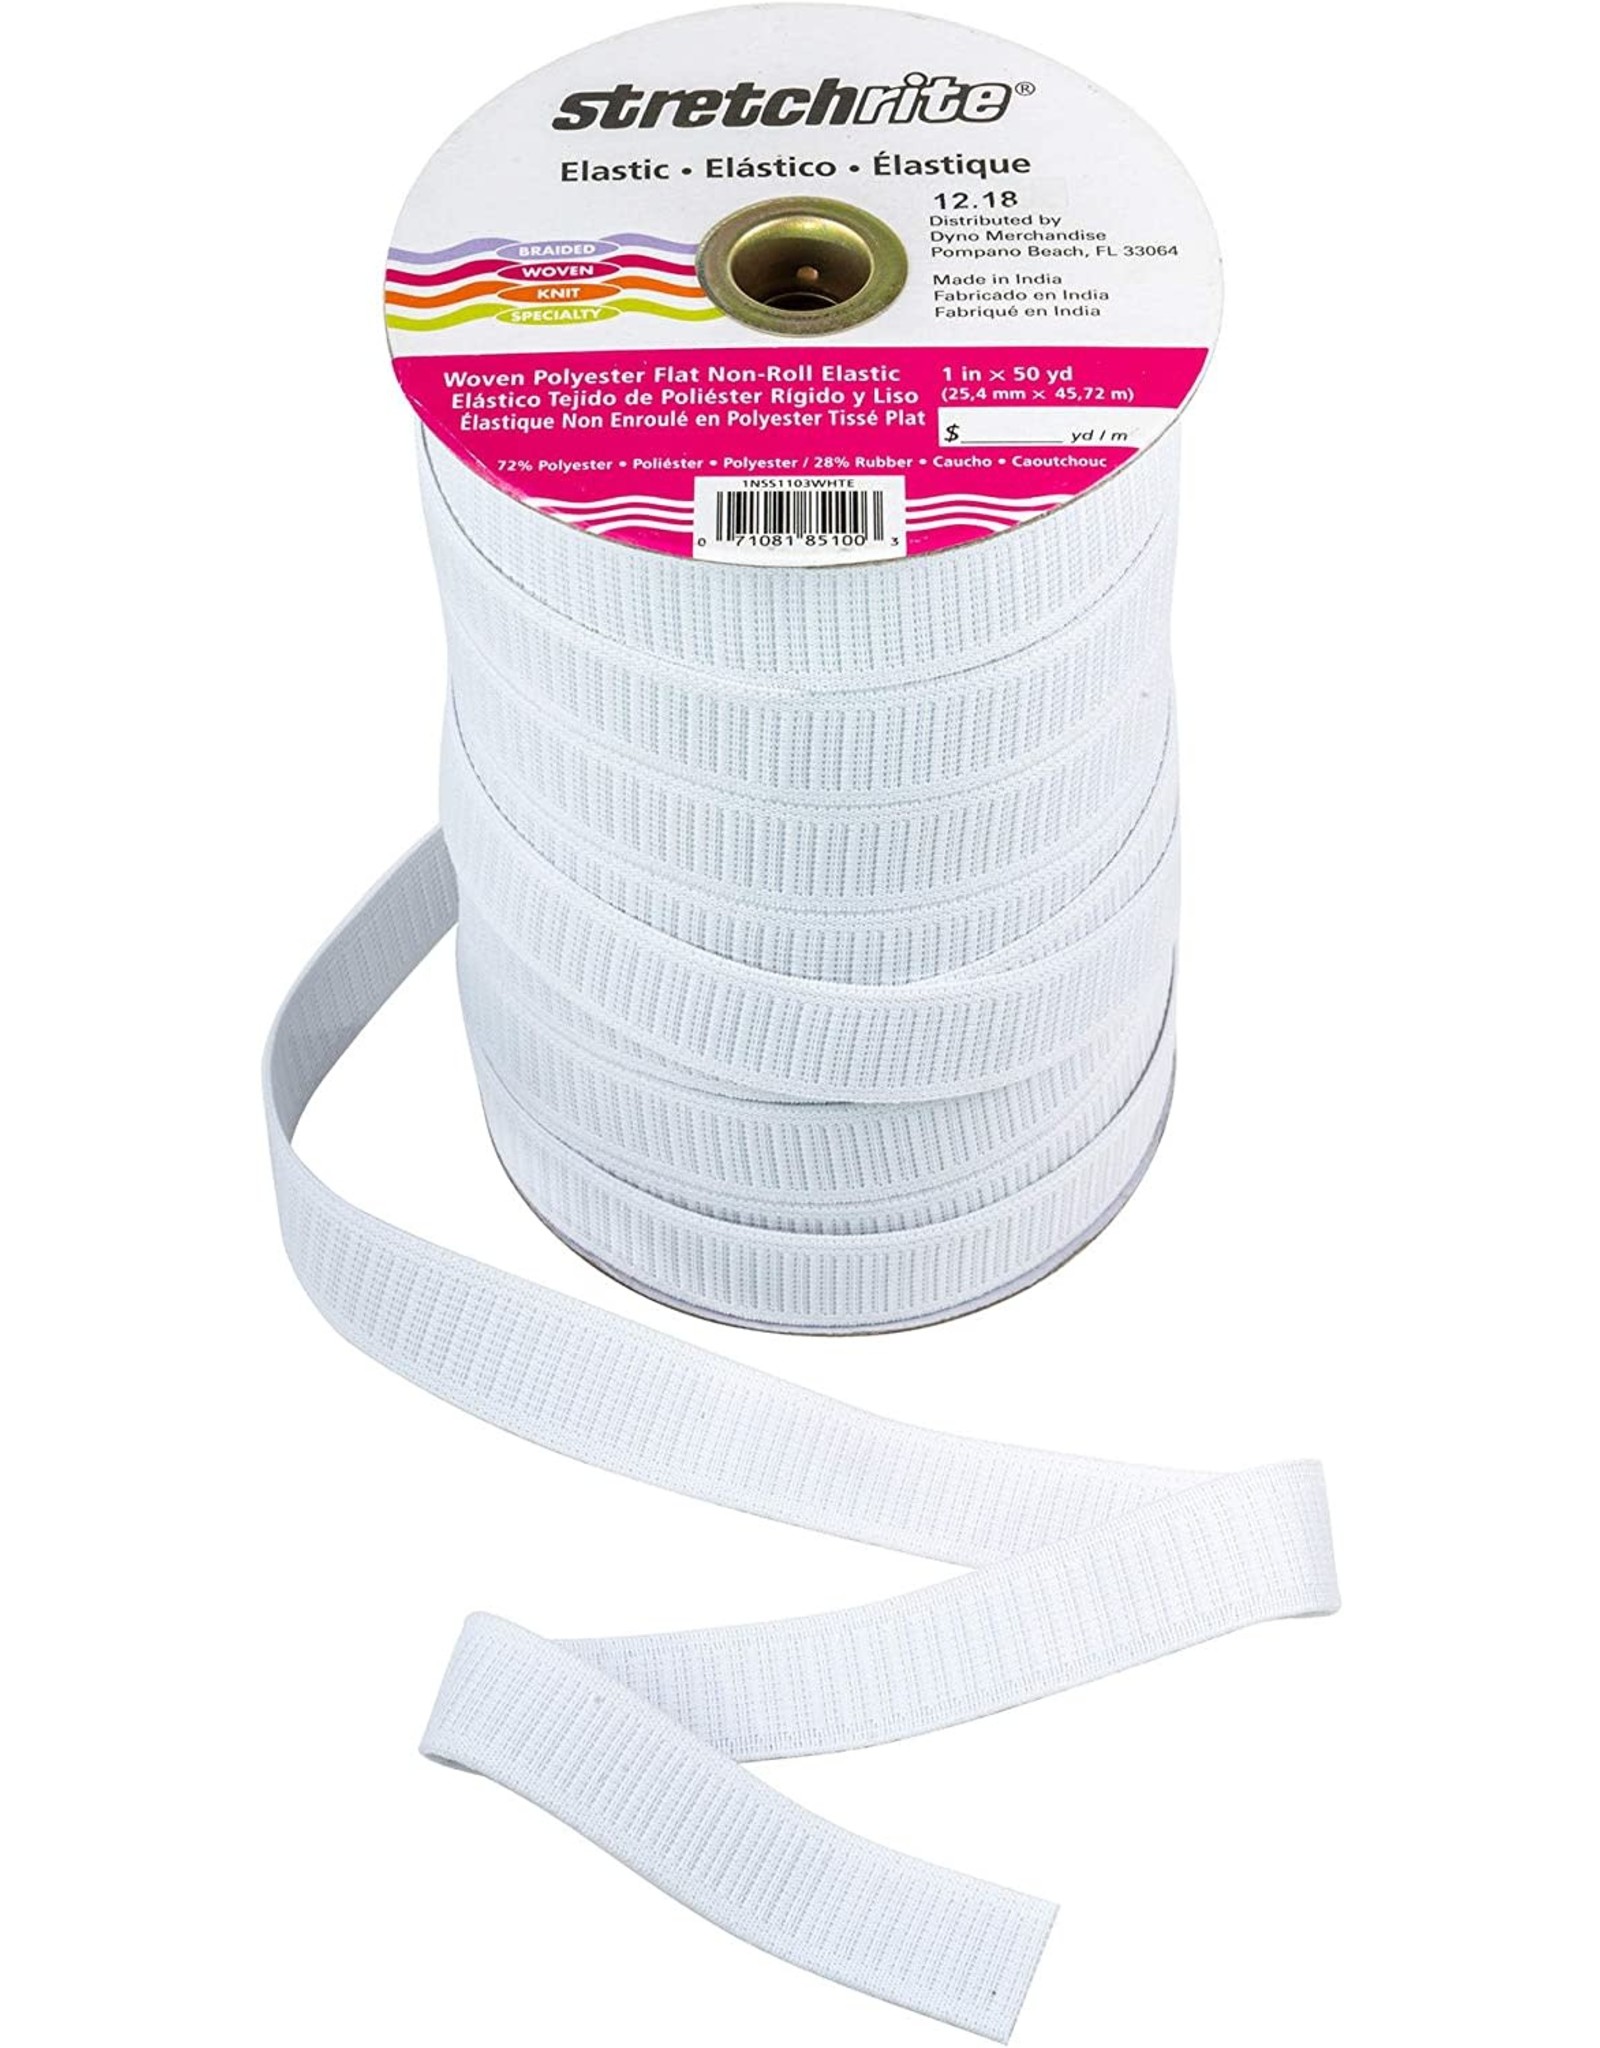 Stretchrite Stretchrite Woven Non-Roll Elastic 1 inch wide, by the yard